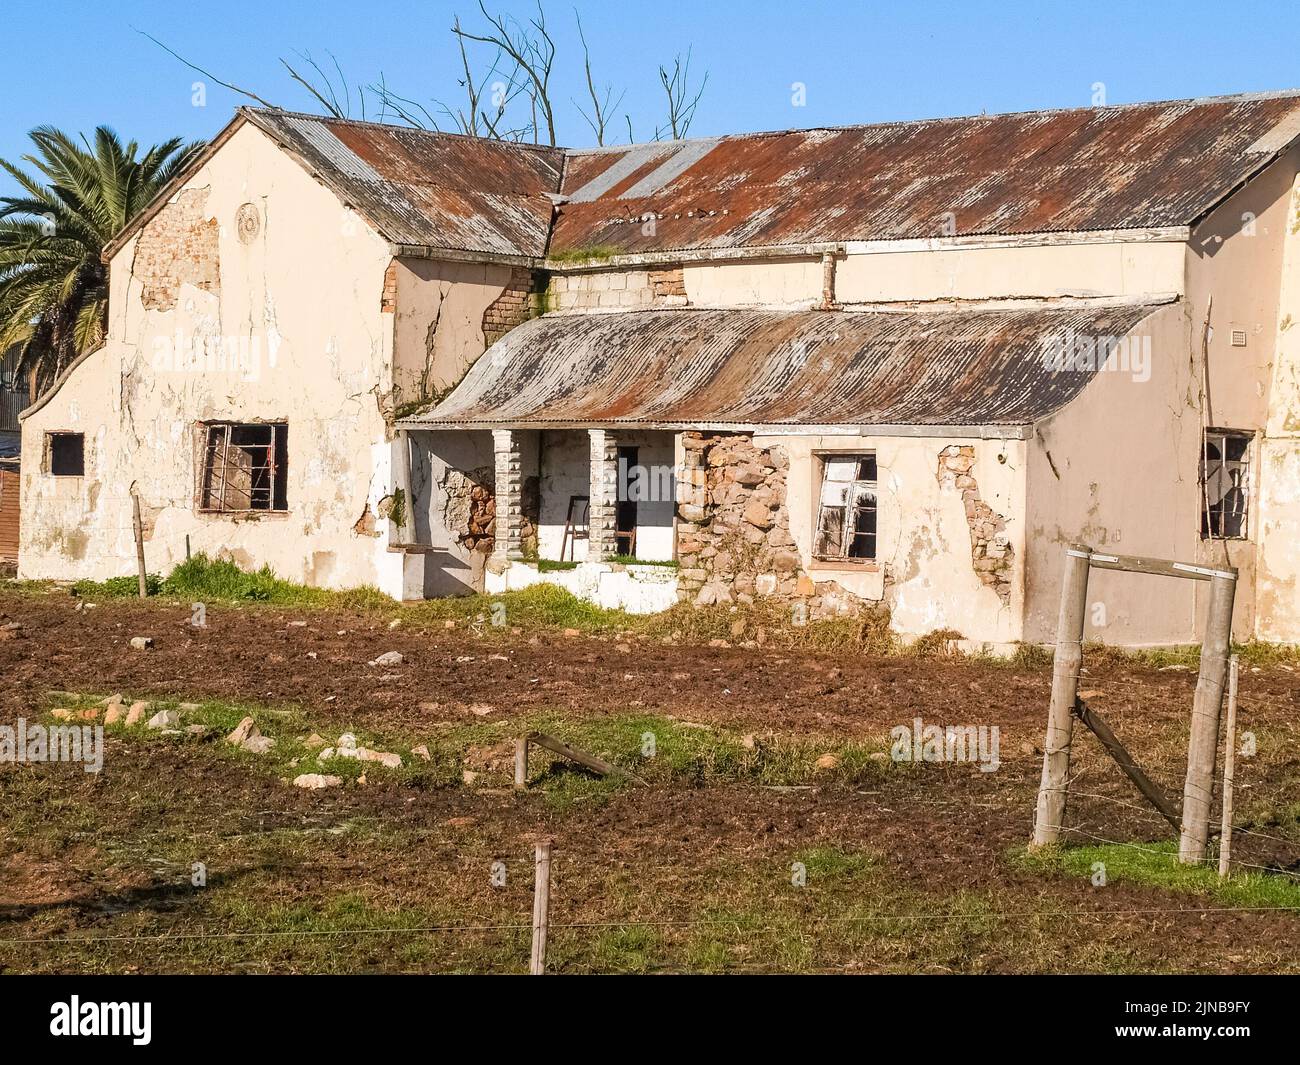 Derelict rural property with building in disrepair in country South Africa. Stock Photo